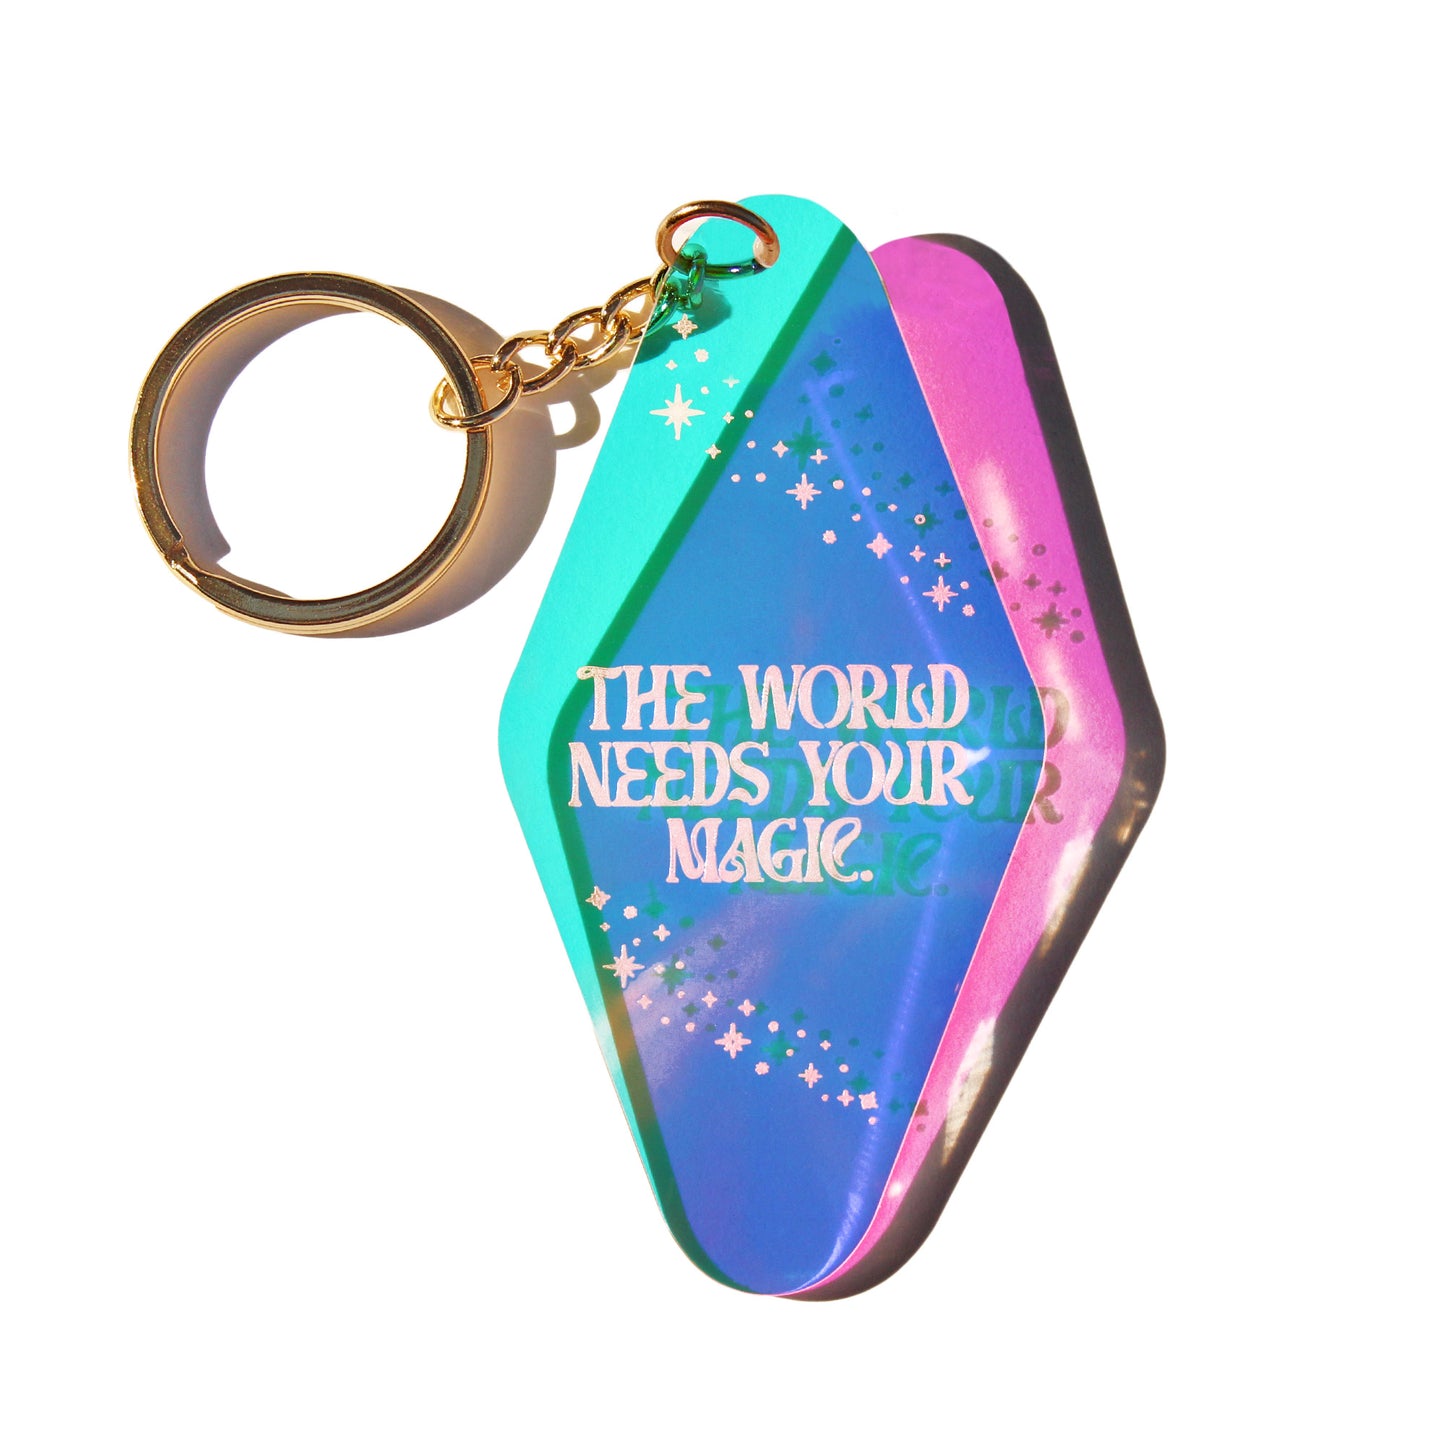 magic keychain, the world needs your magic, inspirational quote, affirmation